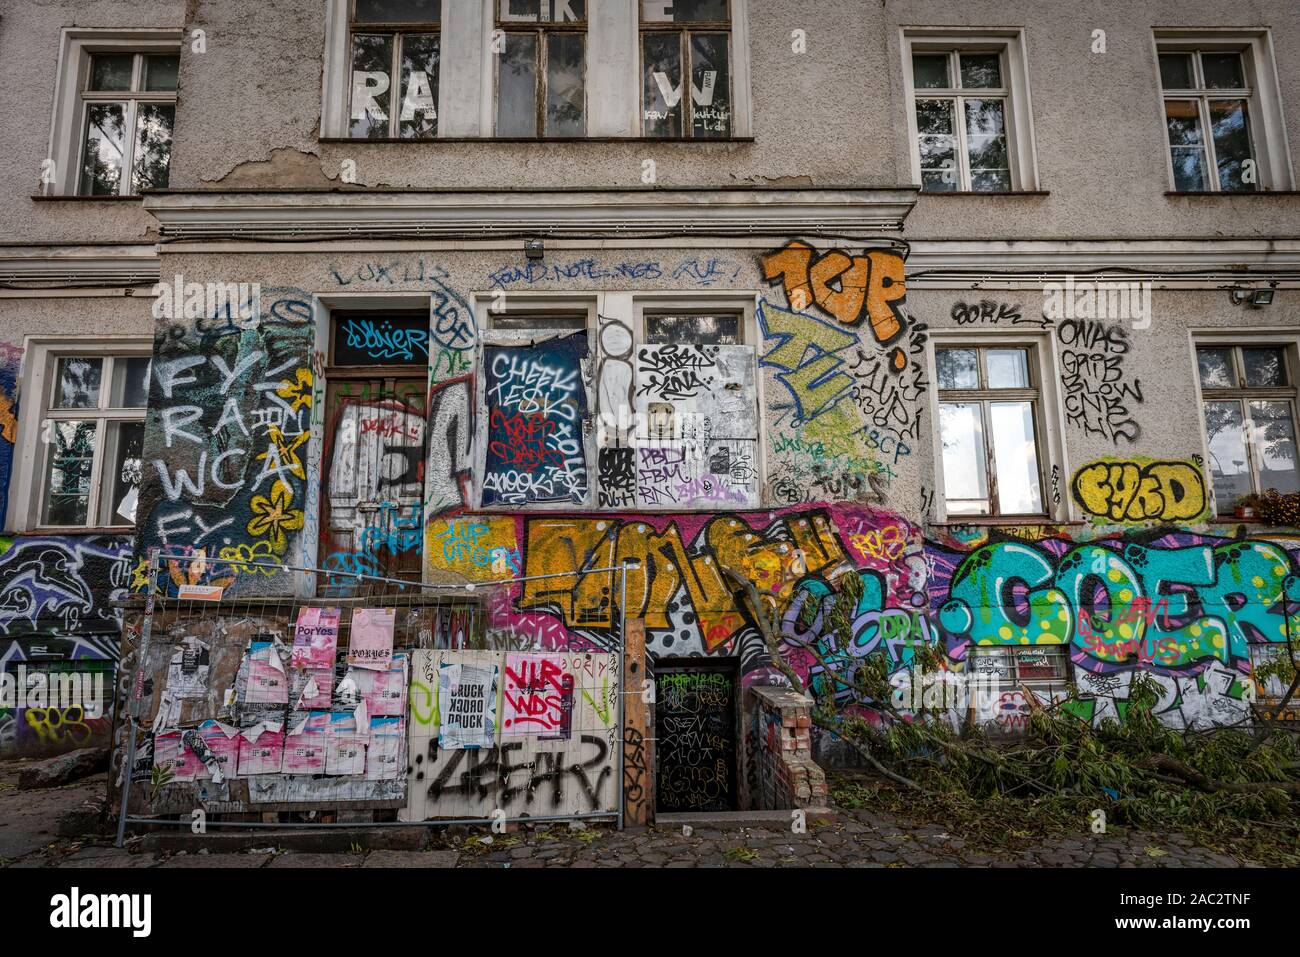 A heavily graffitied derelict building in Berlin, Germany Stock Photo